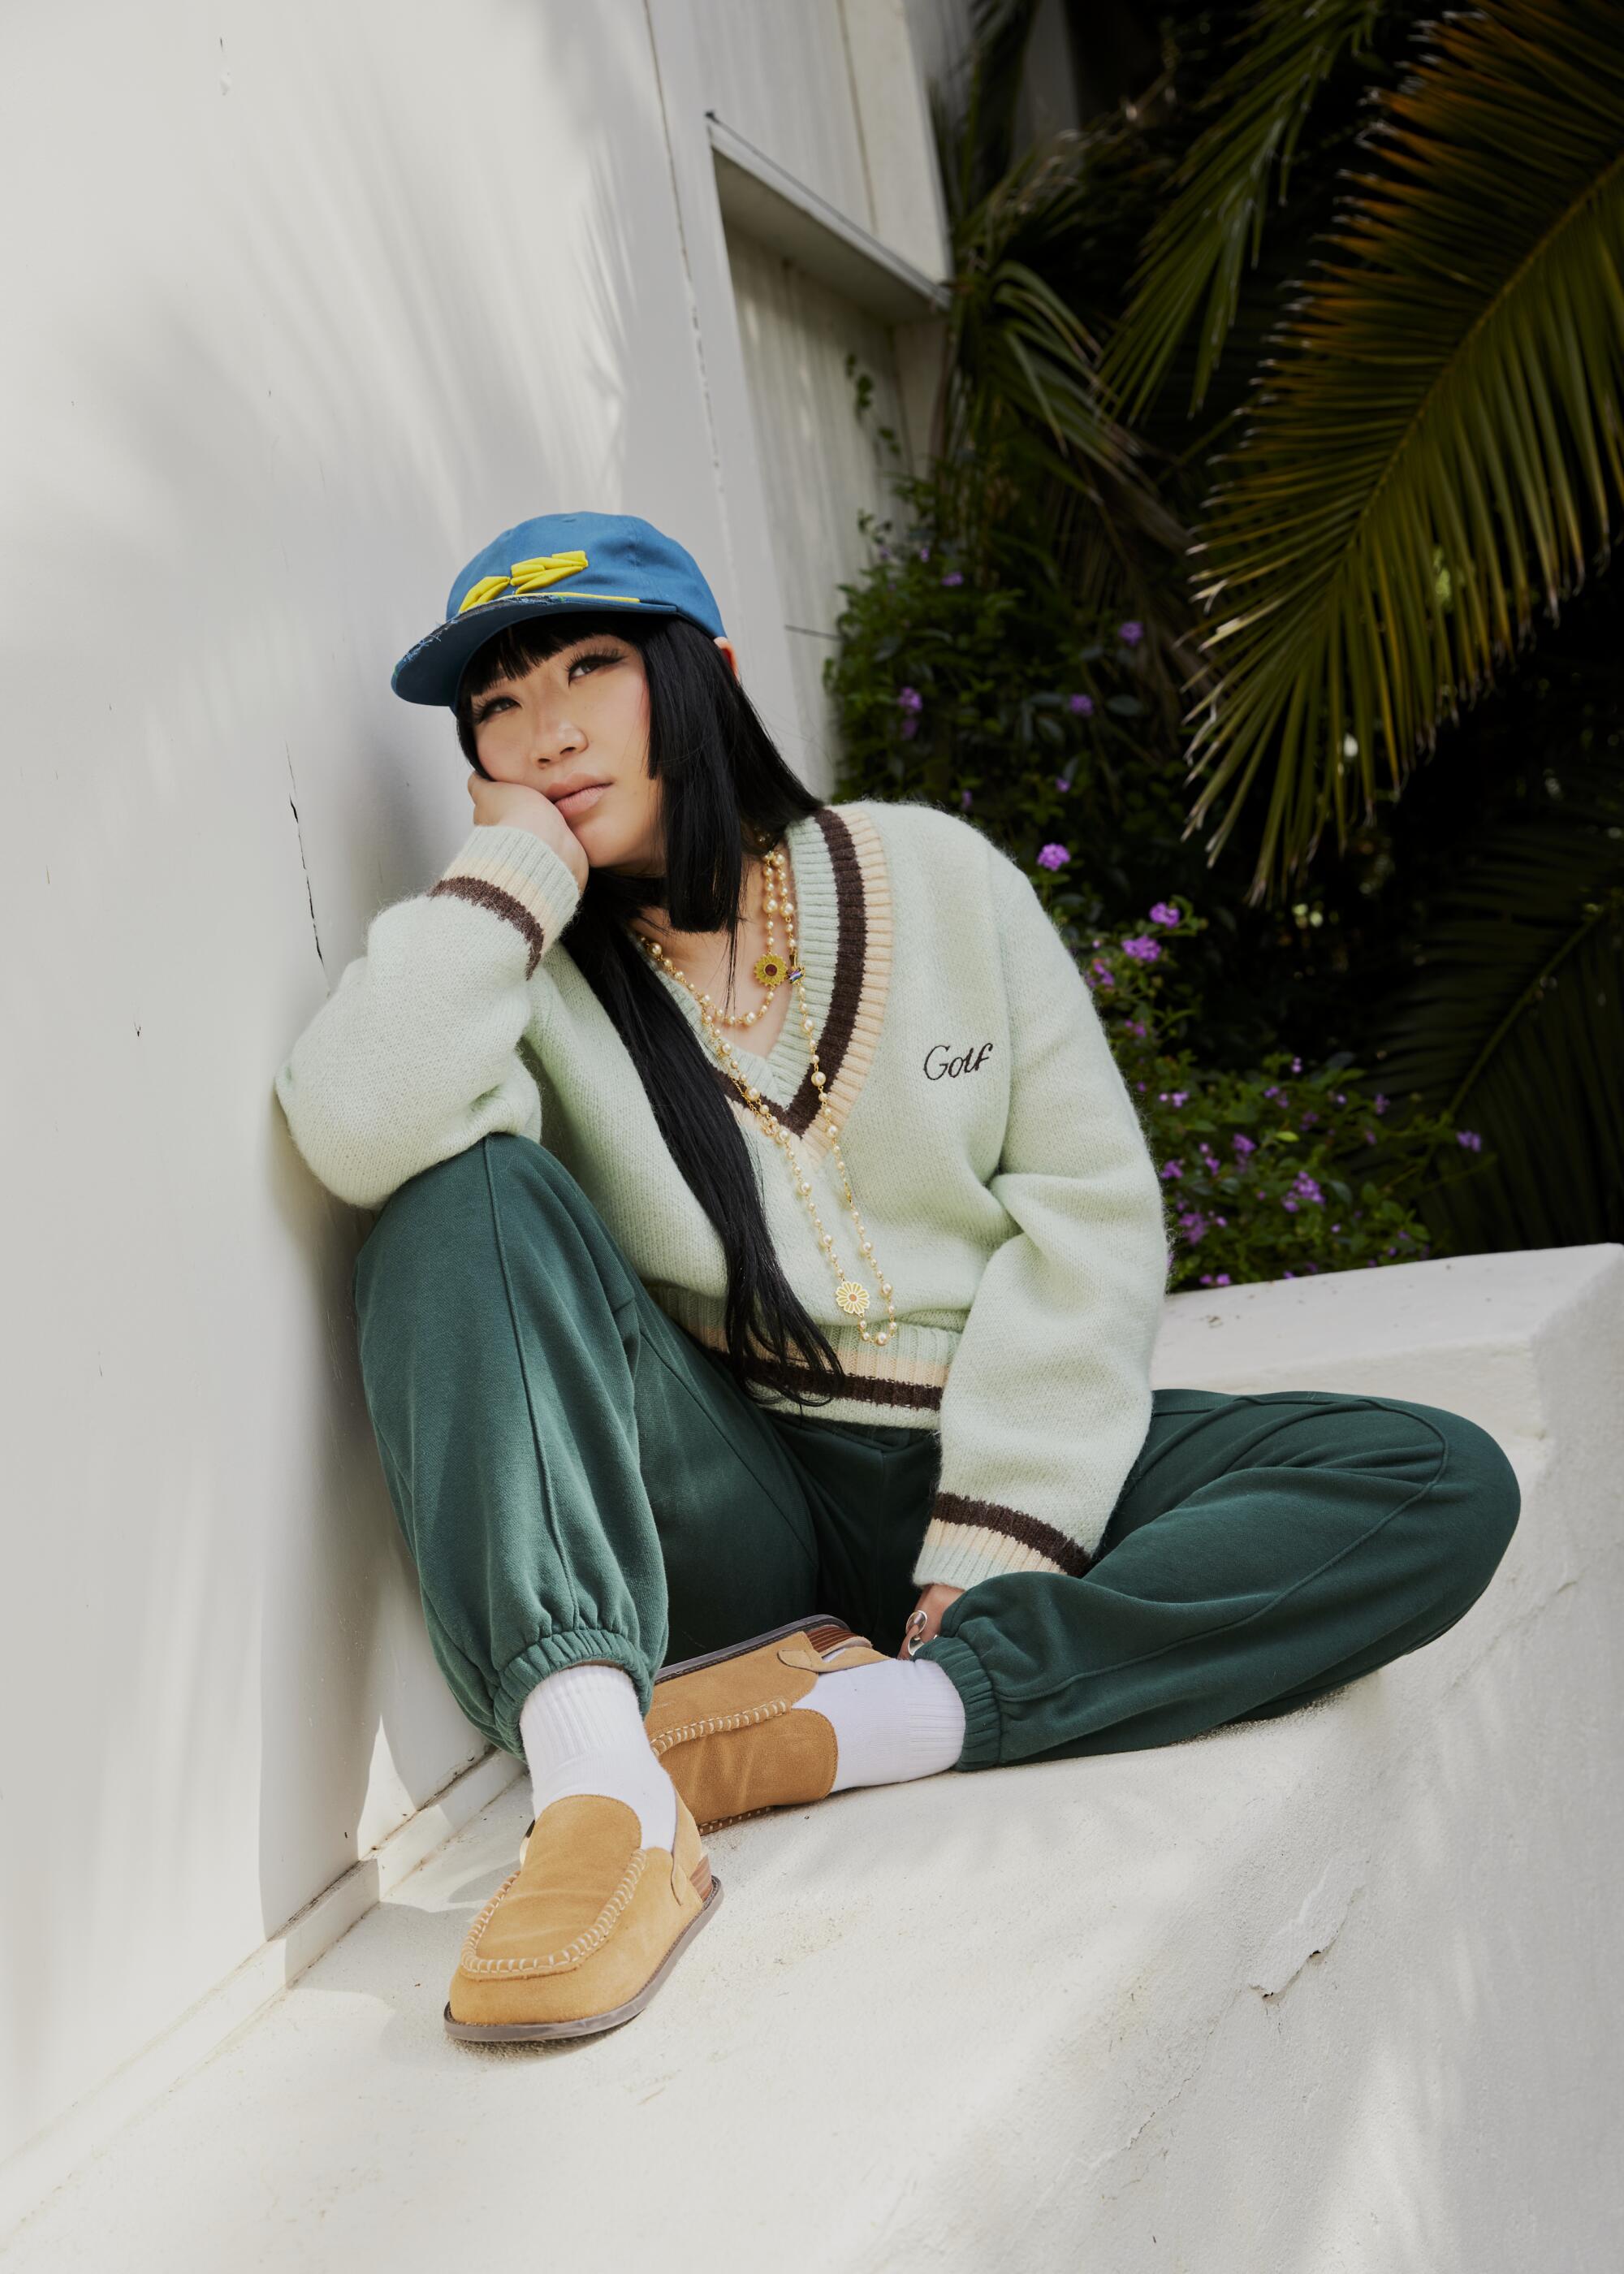 Stylist Jess Mori wears an all-green suit and a blue cap.